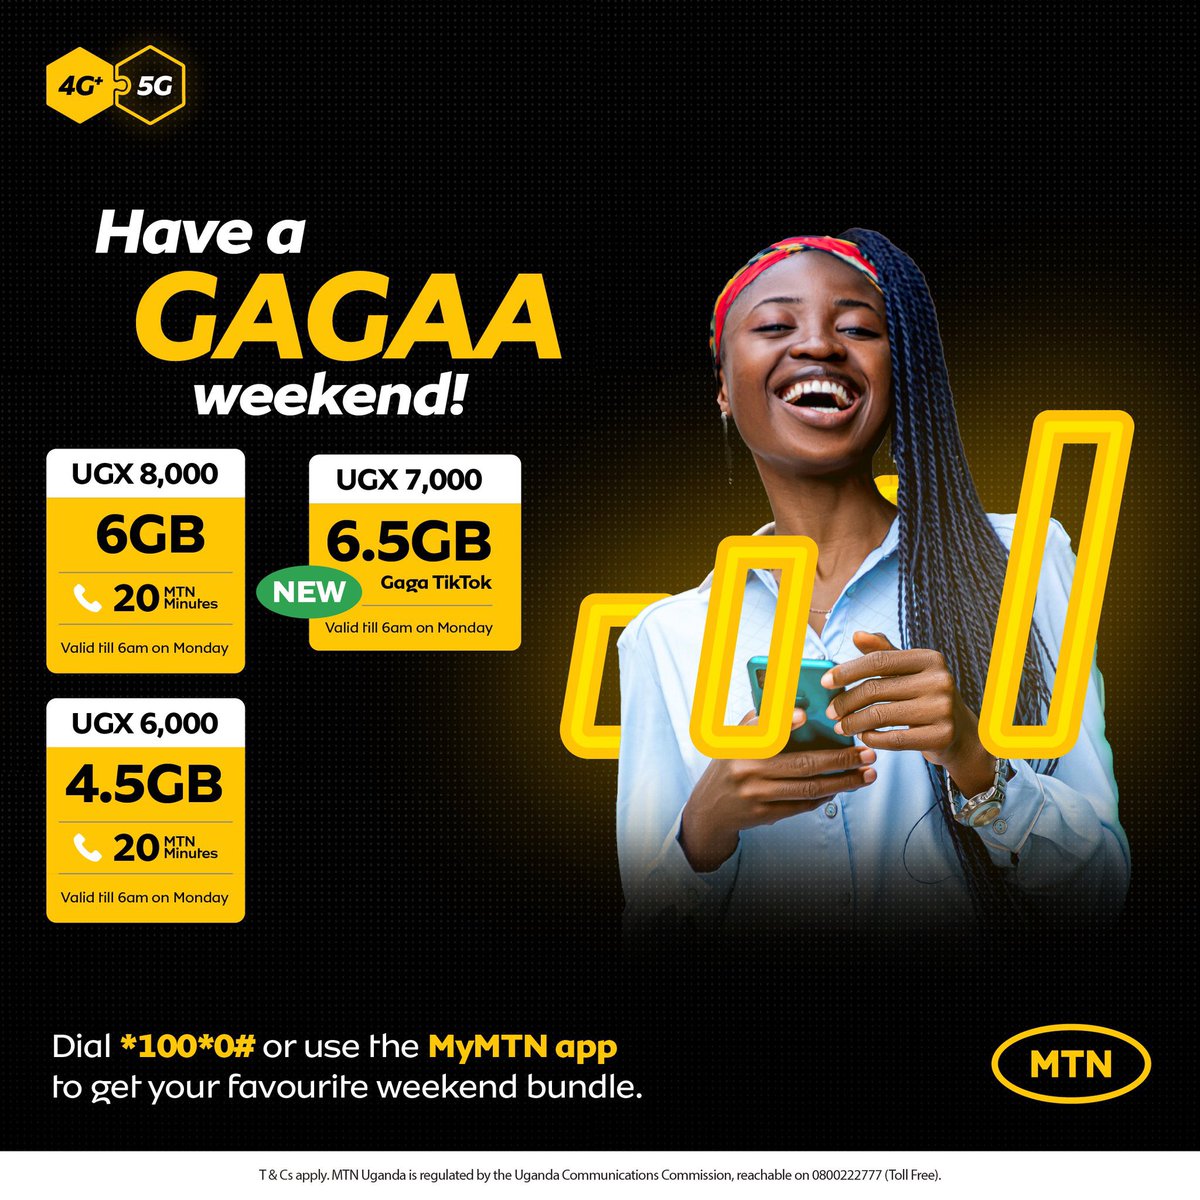 It’s still #GagaWeekend
Enjoy bundles from mtn throughout the weekend by dailing *100*0# or using your MyMTNApp 
#TogetherWeAreUnstoppable